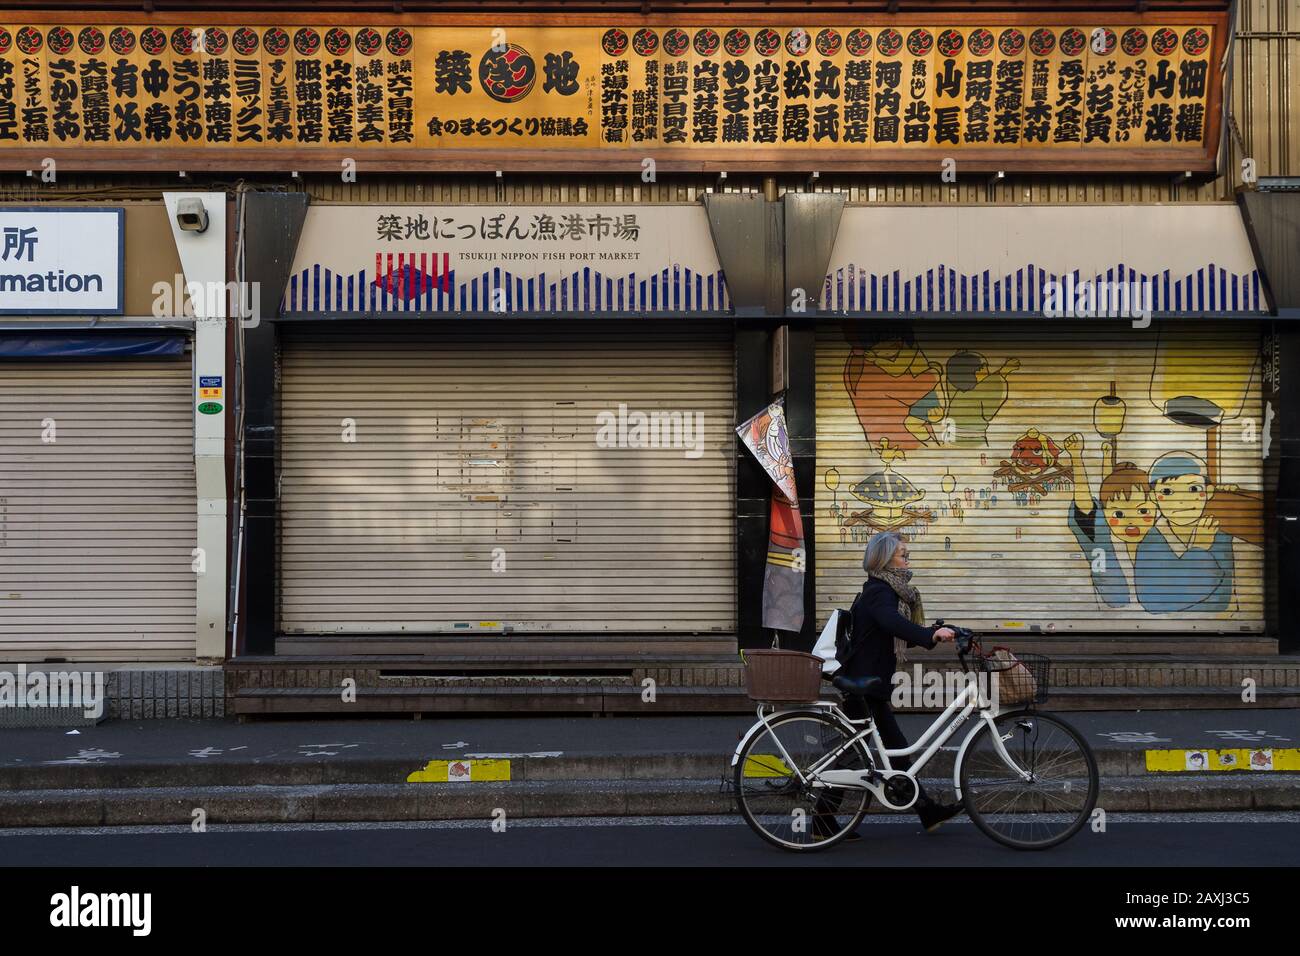 An older Japanese woman pushes a bicycle passed the shuttered store fronts of shops in what remains of Tsukiji outer market. Tsukiji, Tokyo, Japan. Stock Photo